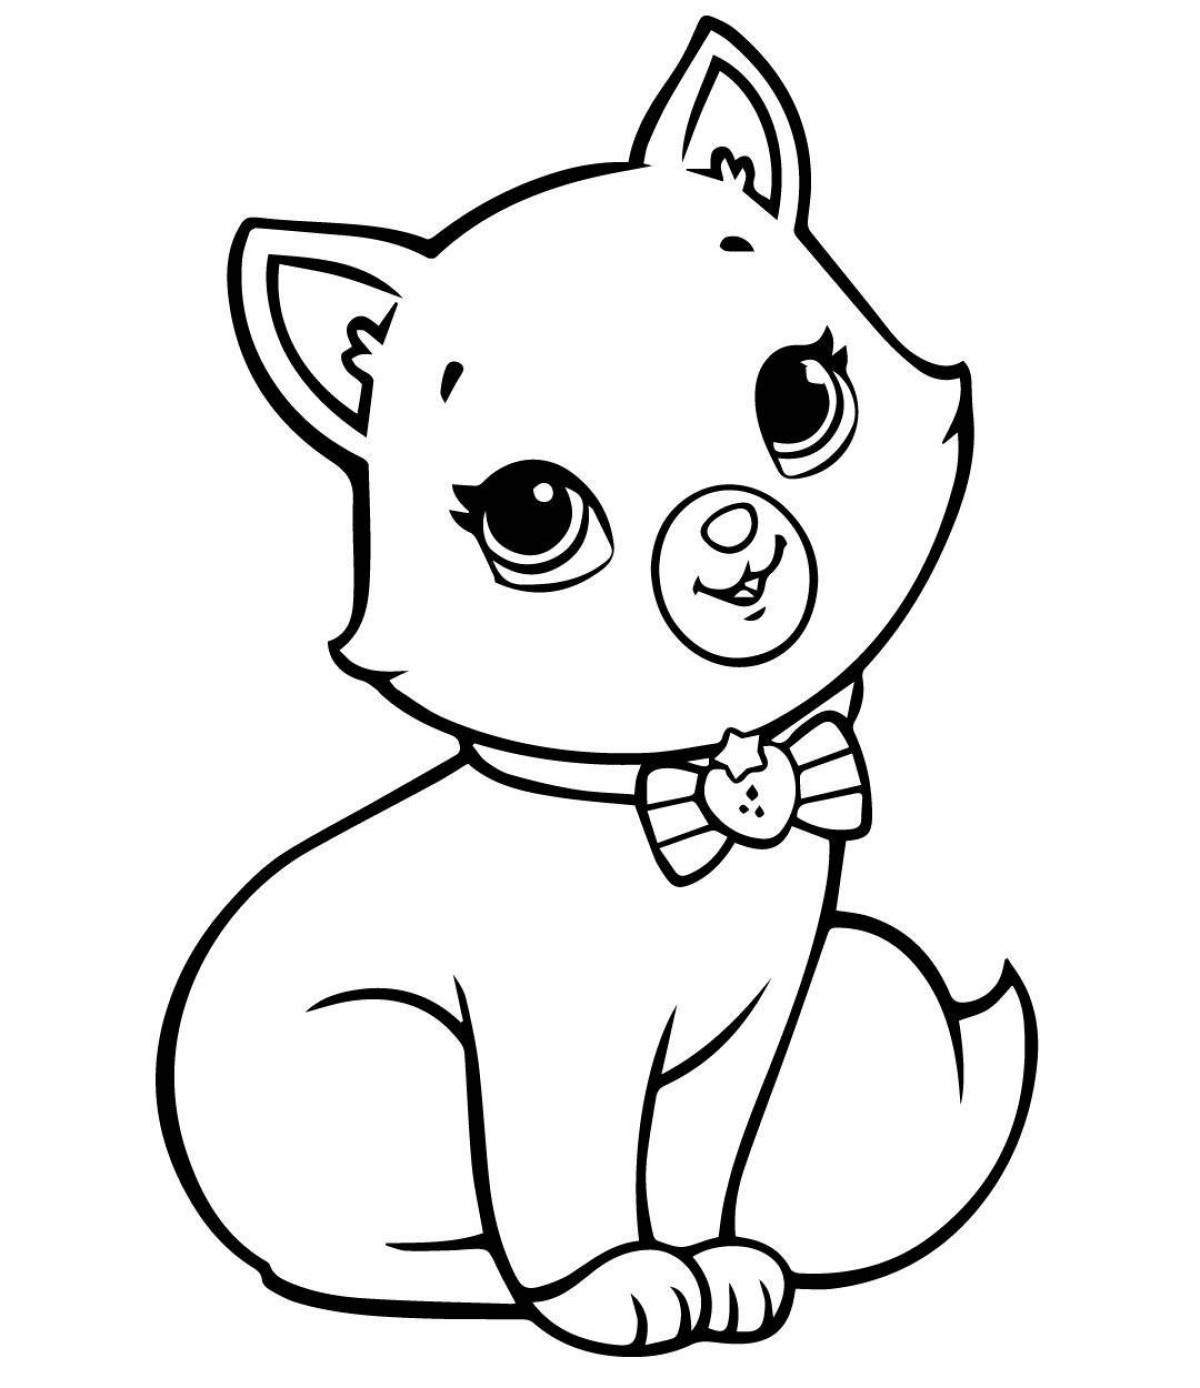 Colorful coloring book for kitty girls